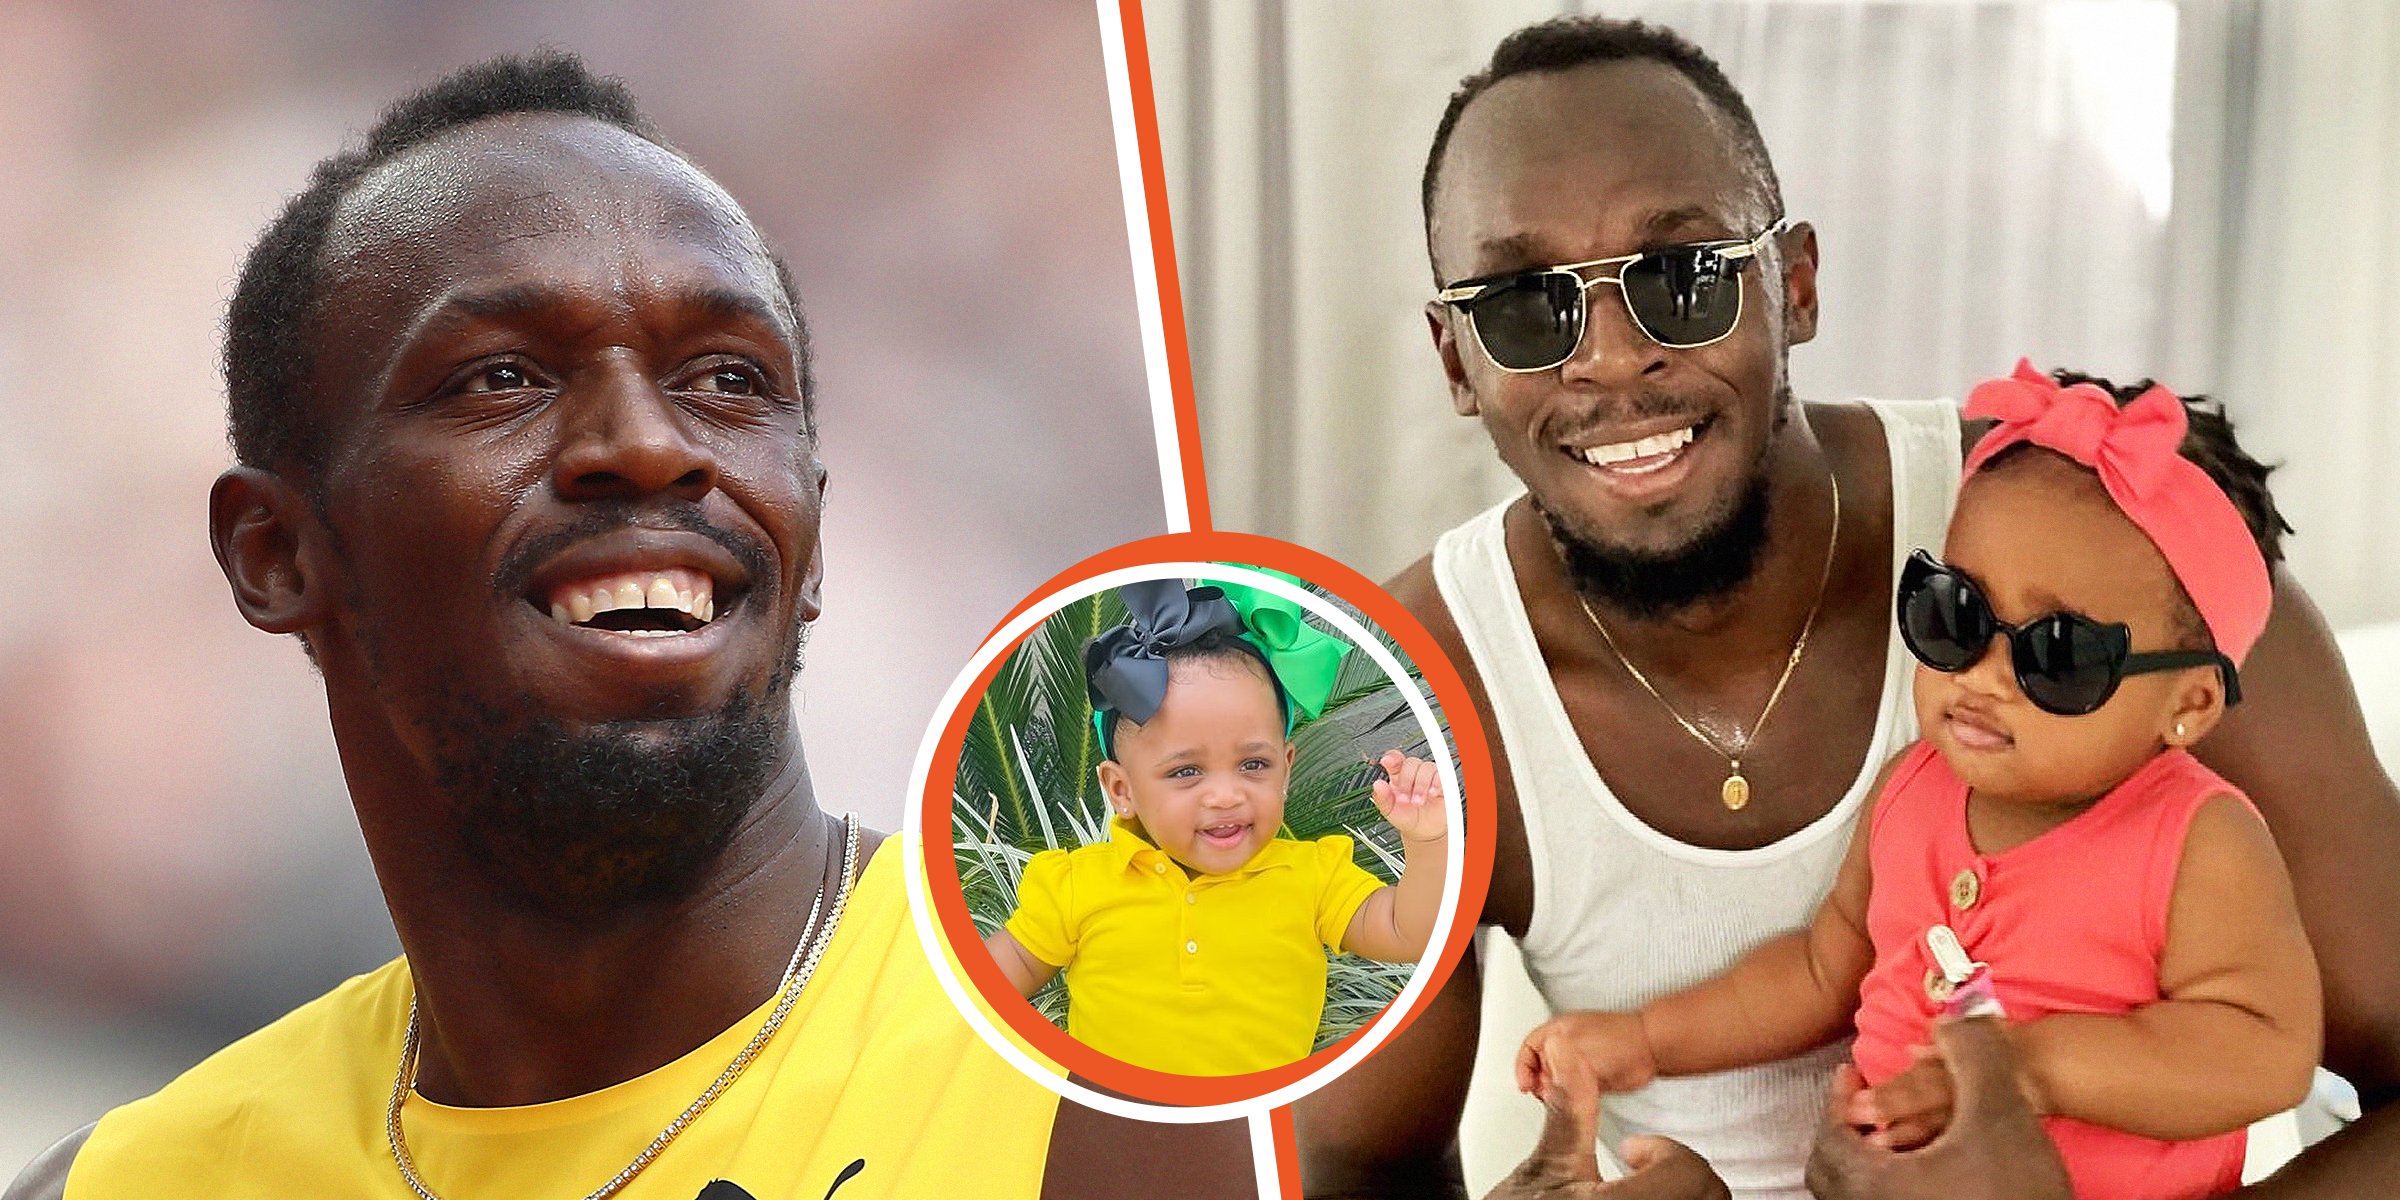 Olympia Lightning Bolt with Usain Bolt | Source: Getty Images and Instagram.com/usainbolt